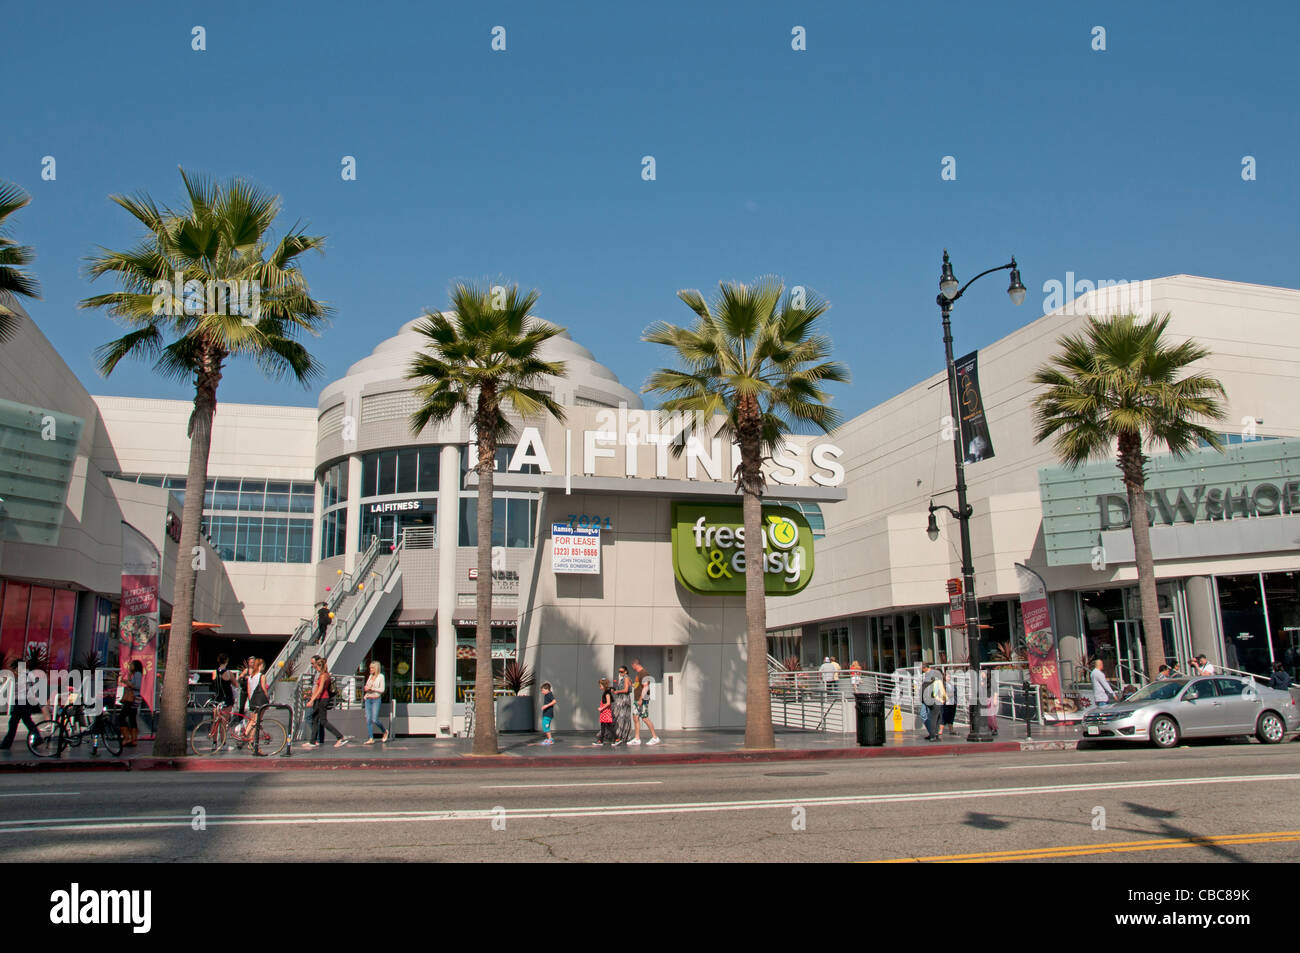 Hollywood Boulevard LA Fitness California United States of America USA Américain Town City Banque D'Images